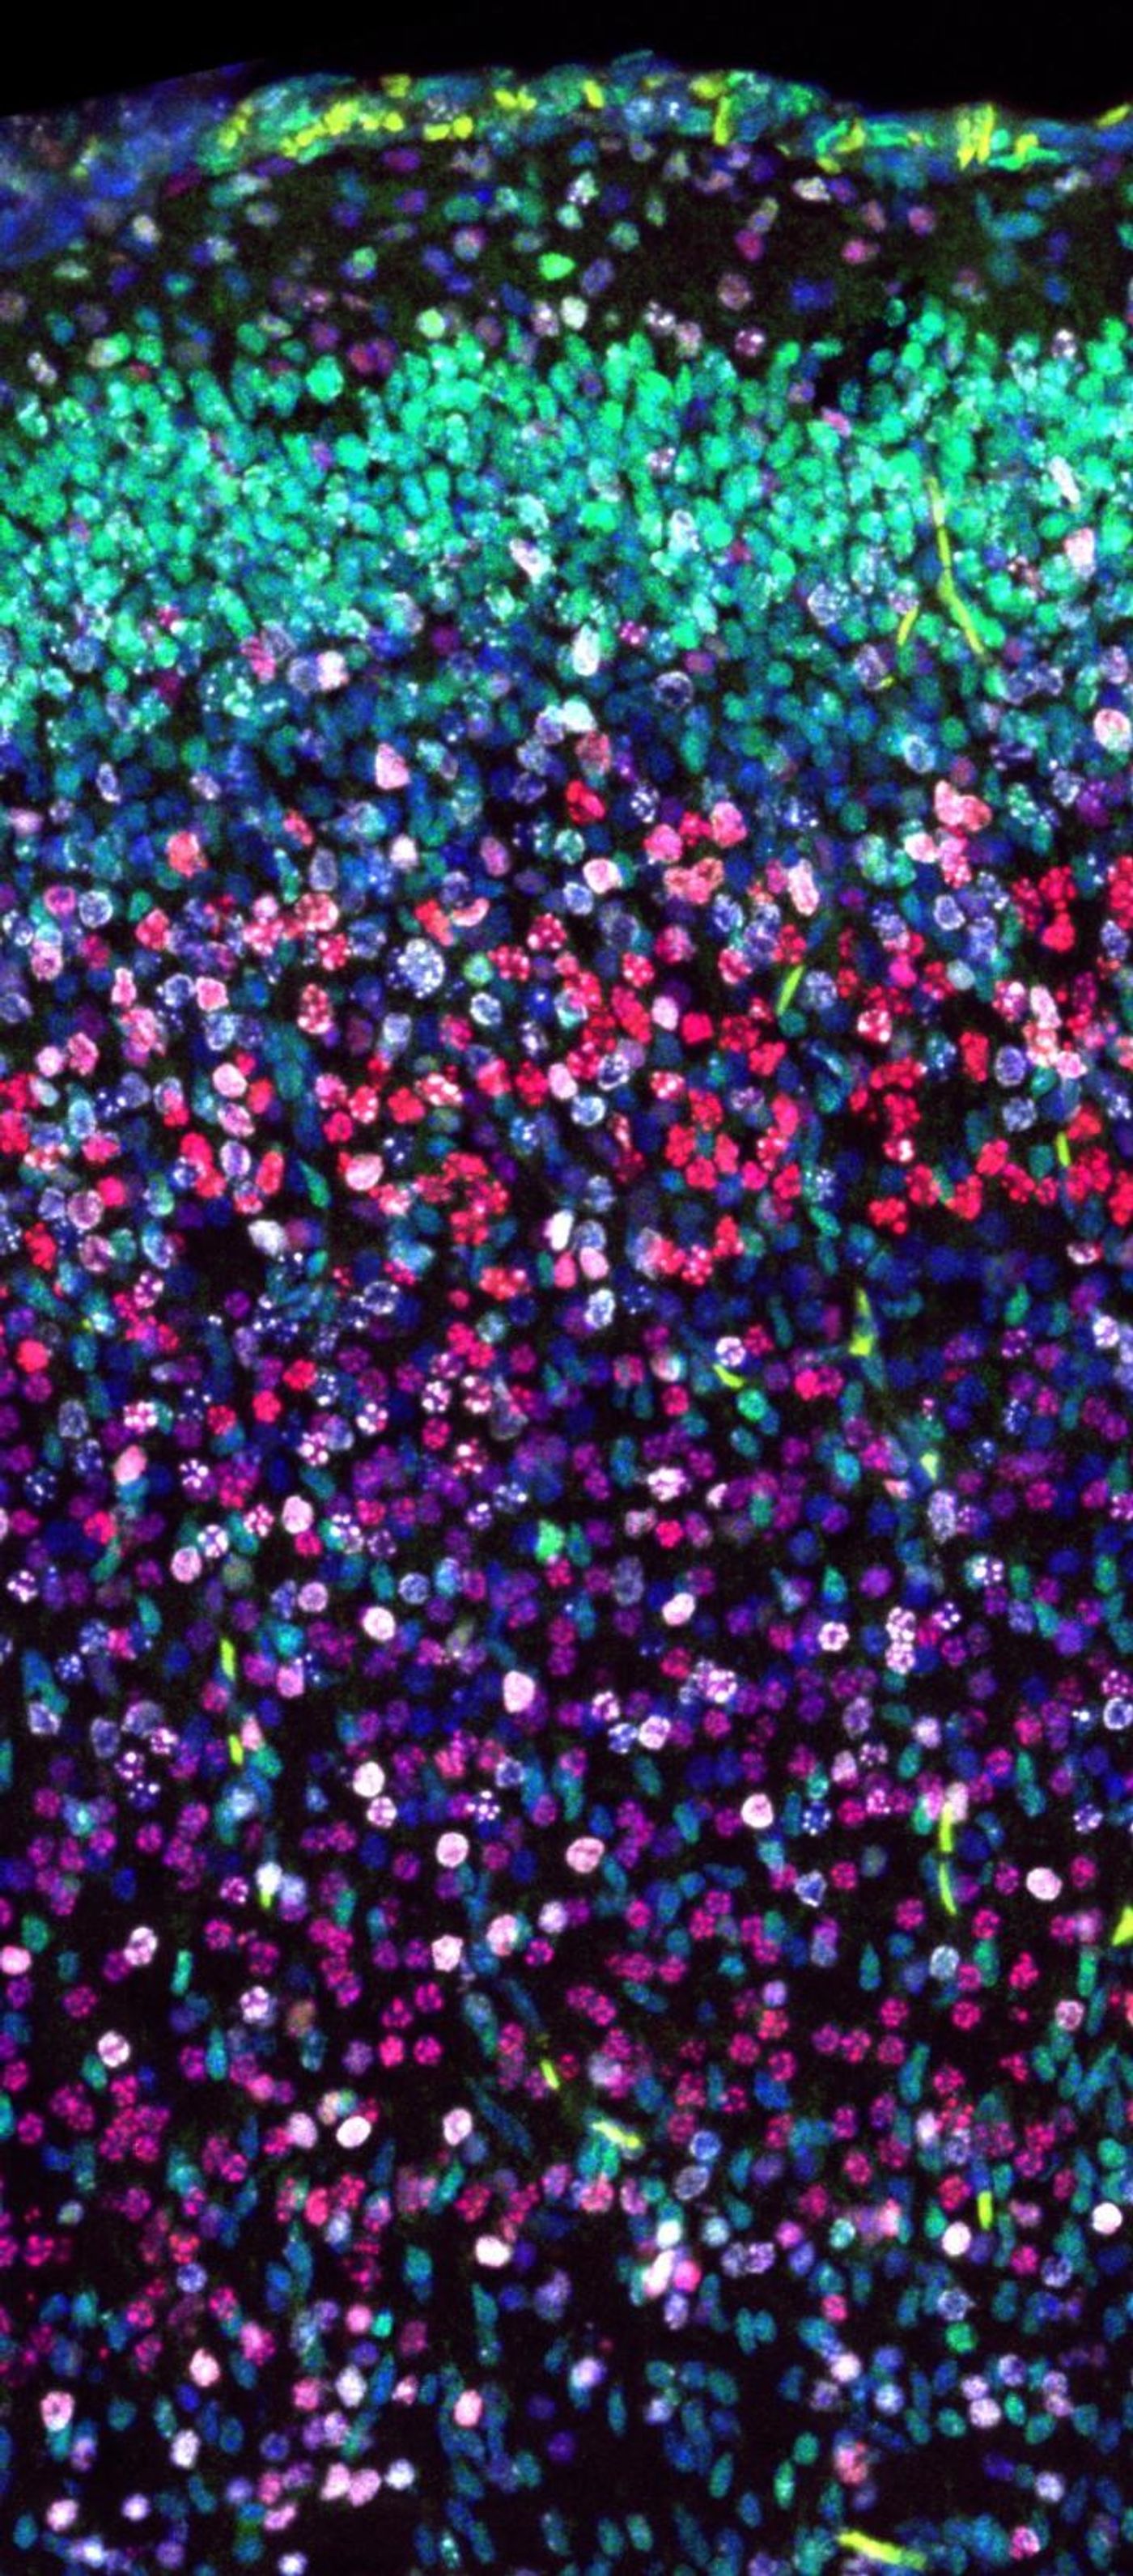 Immunofluorescence staining allows scientists to study the migrating cells (white) in the mouse brain. / Credit: © IST Austria